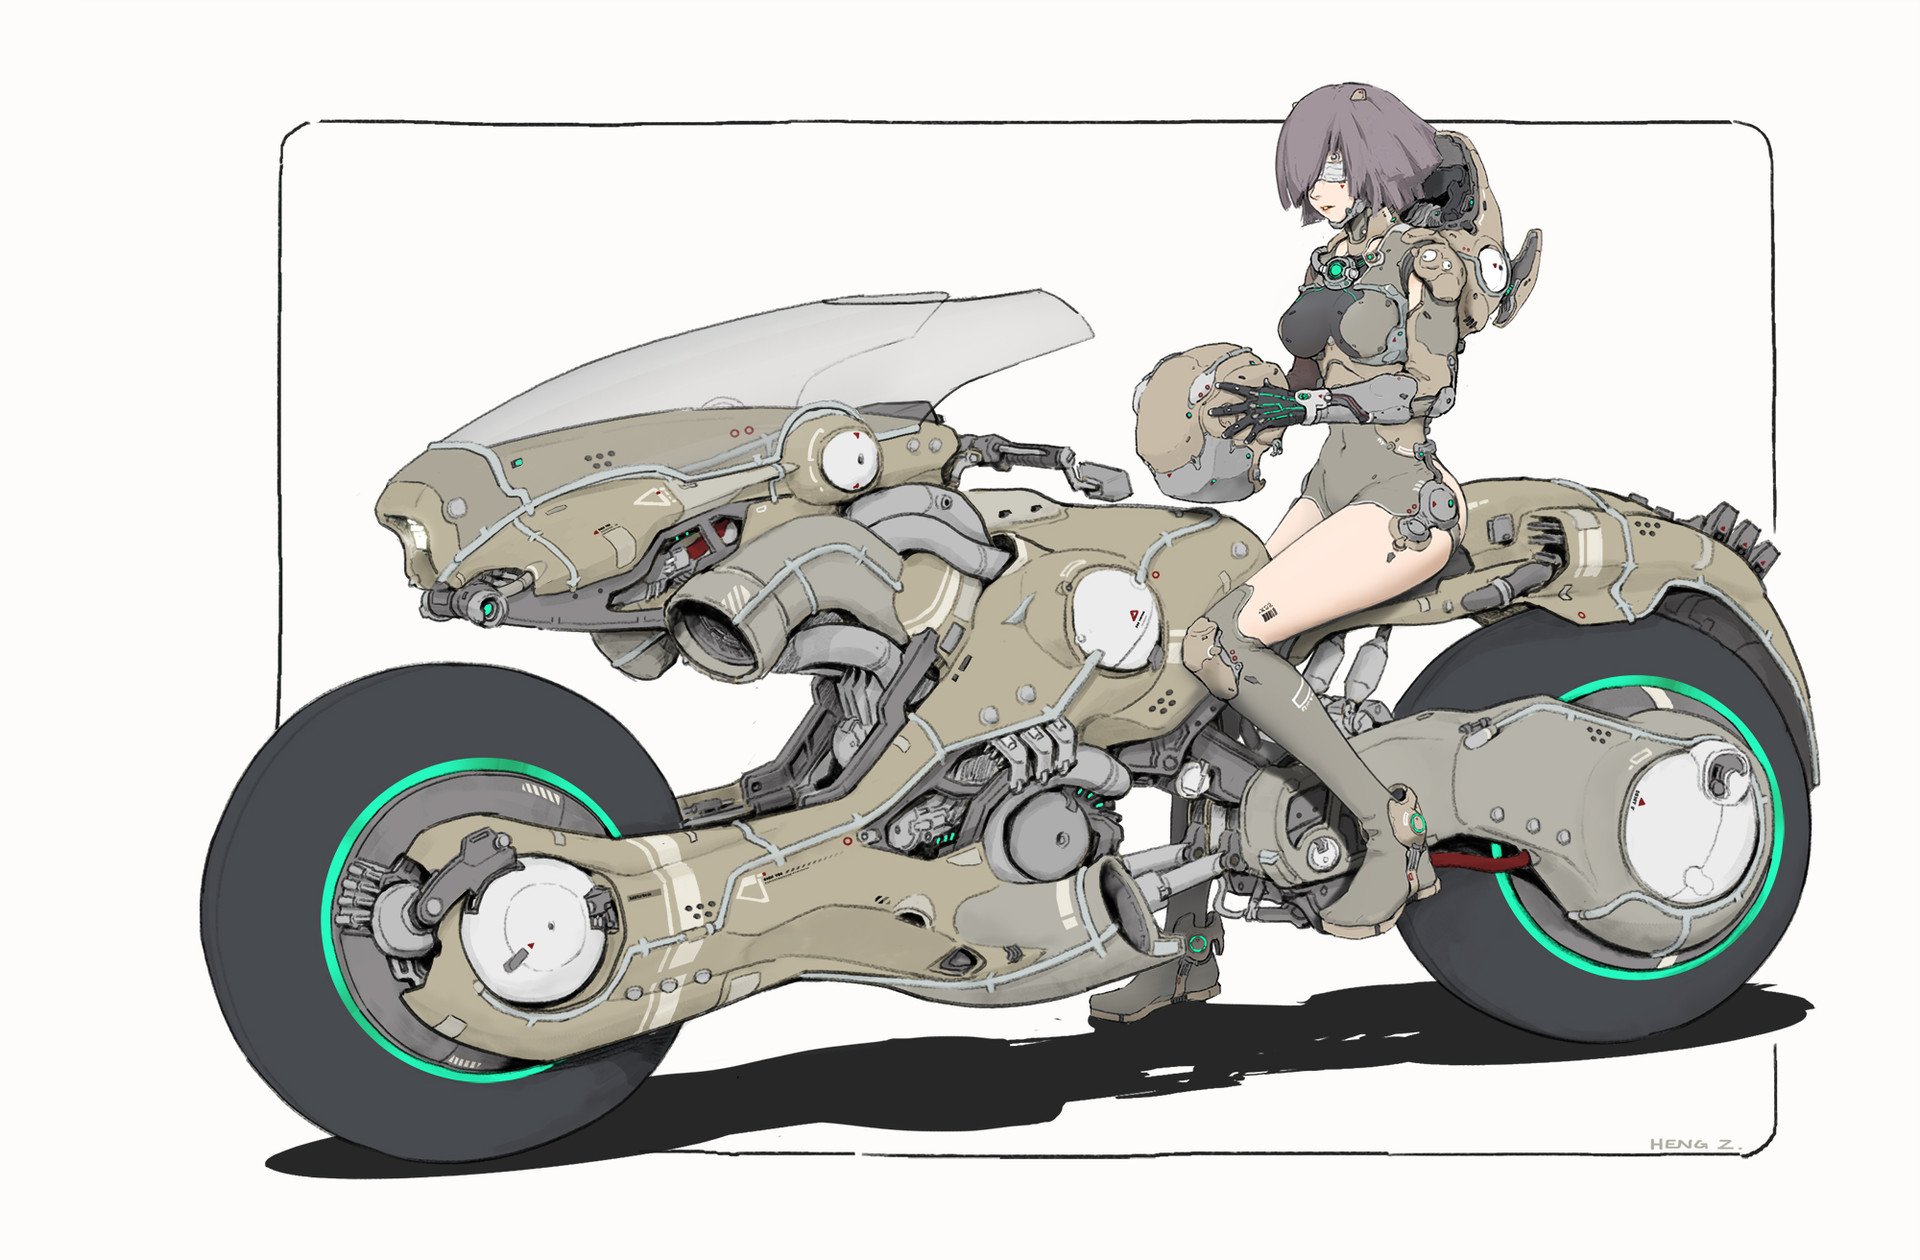 Makes me want to watch Akira again ...